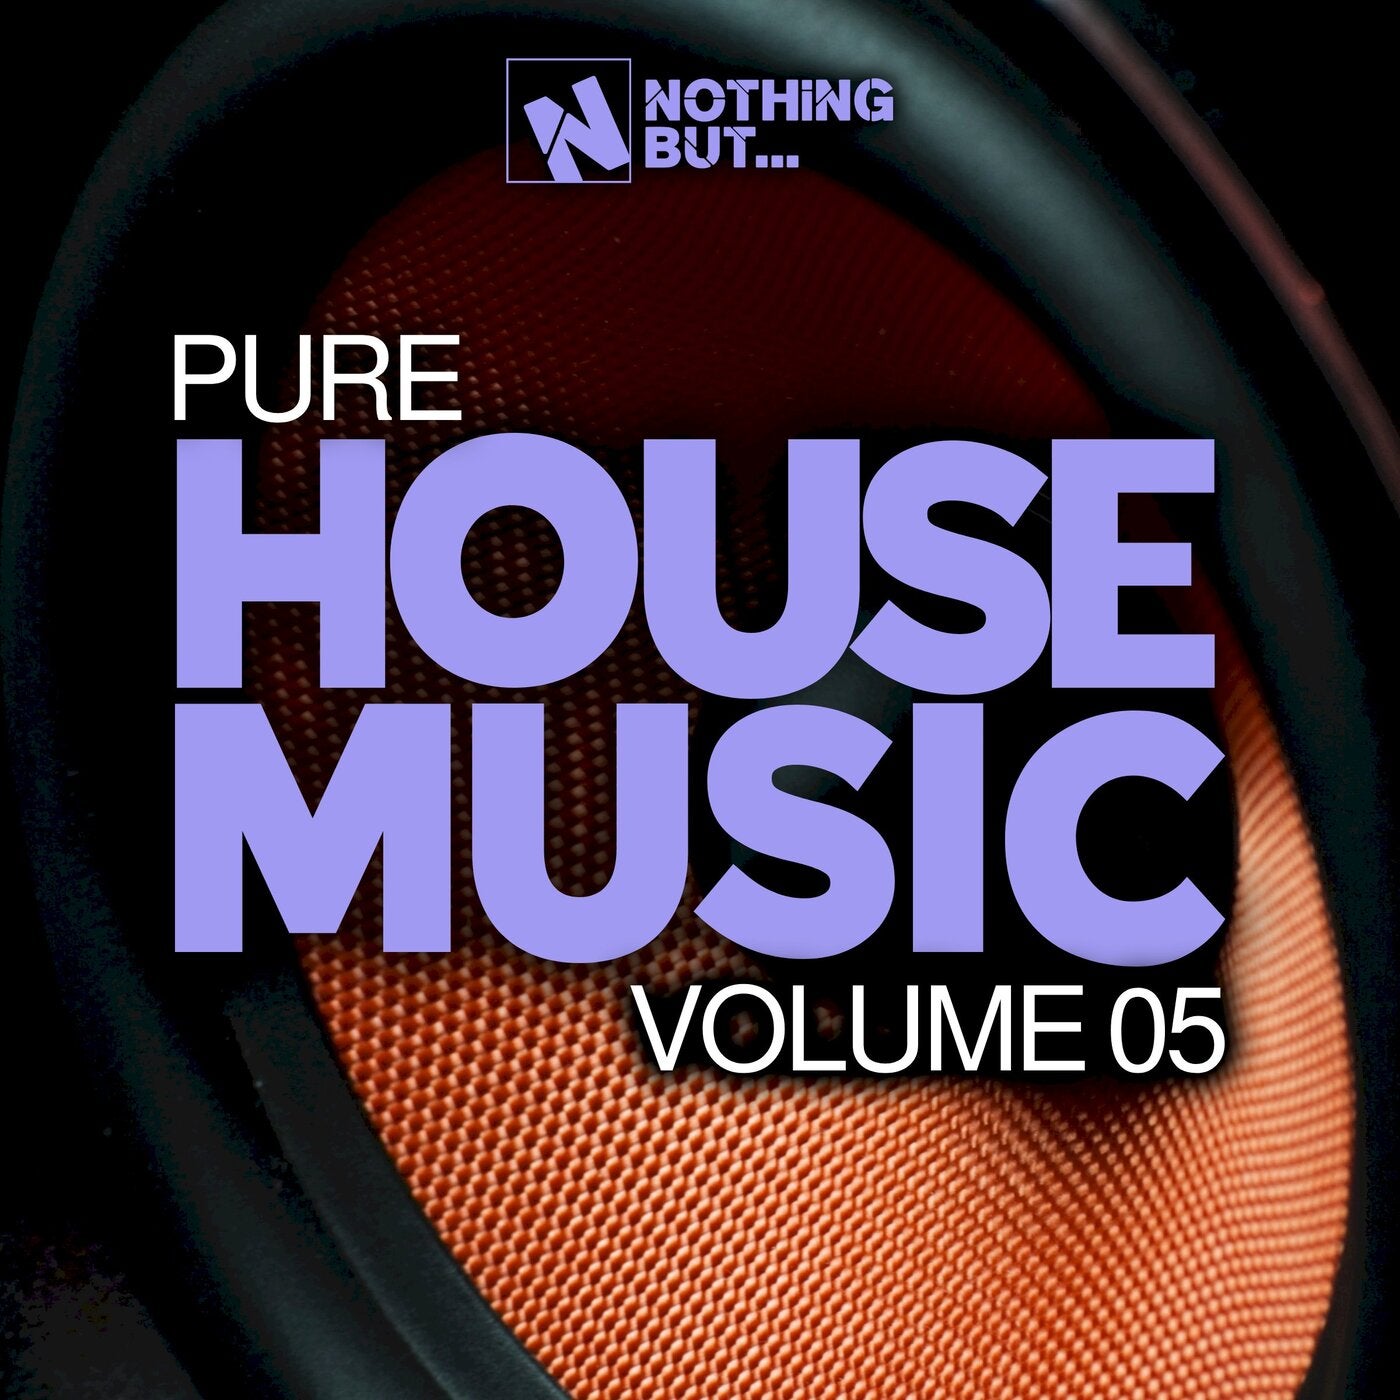 VA – Nothing But… Pure House Music, Vol. 05 [NBPHM05]